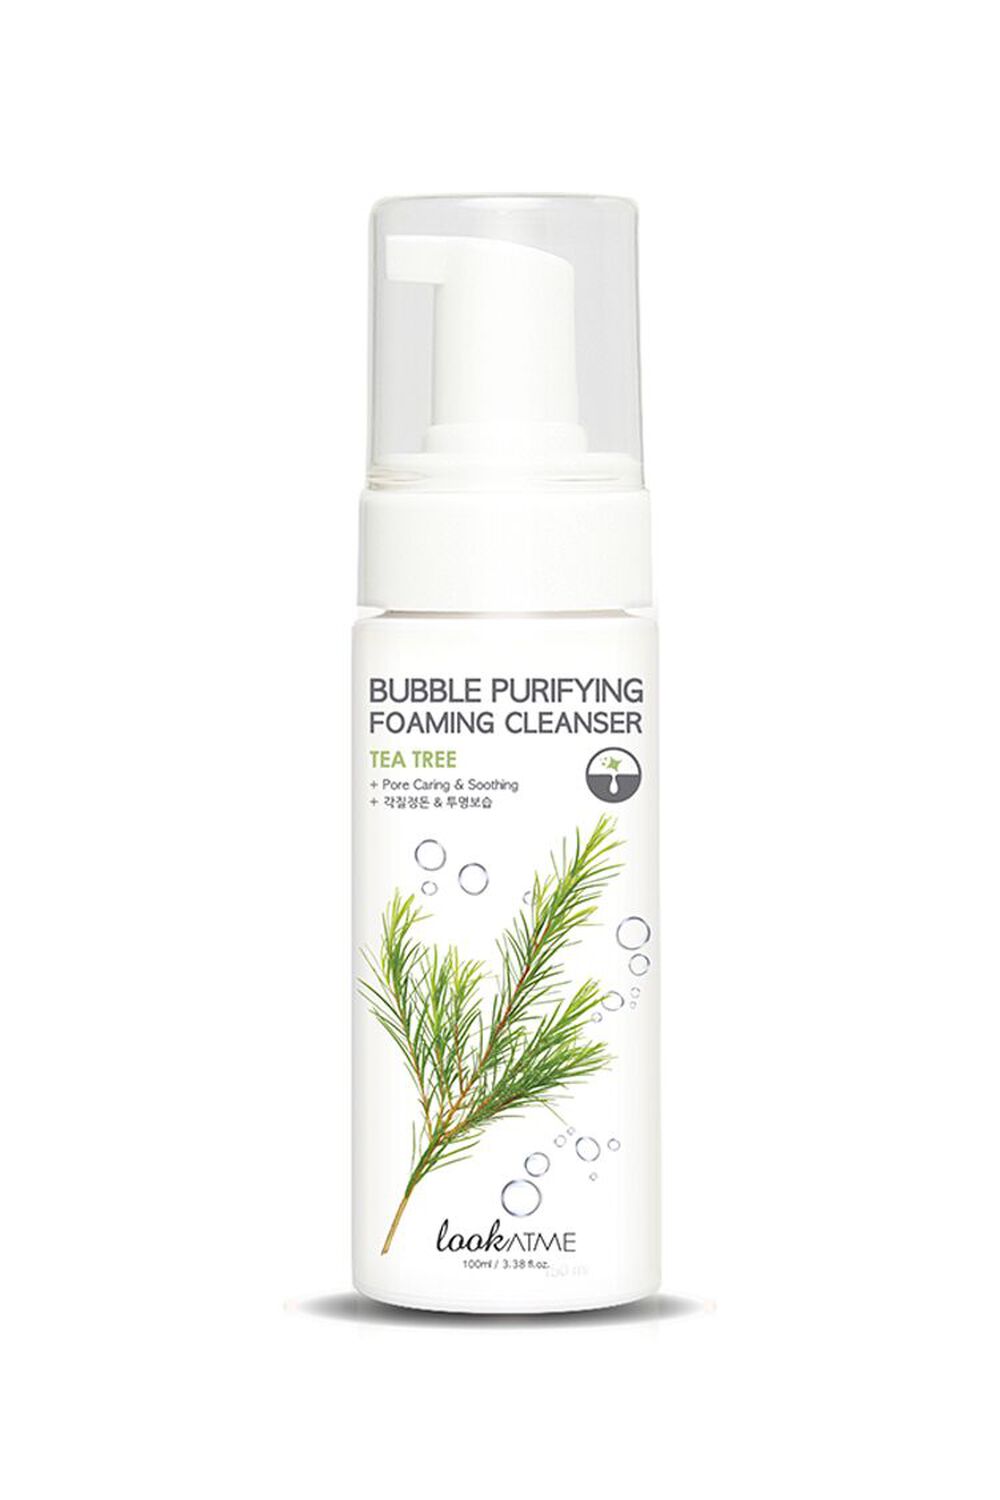 LookAtMe Bubble Purifying Foaming Cleanser Tea Tree, image 1